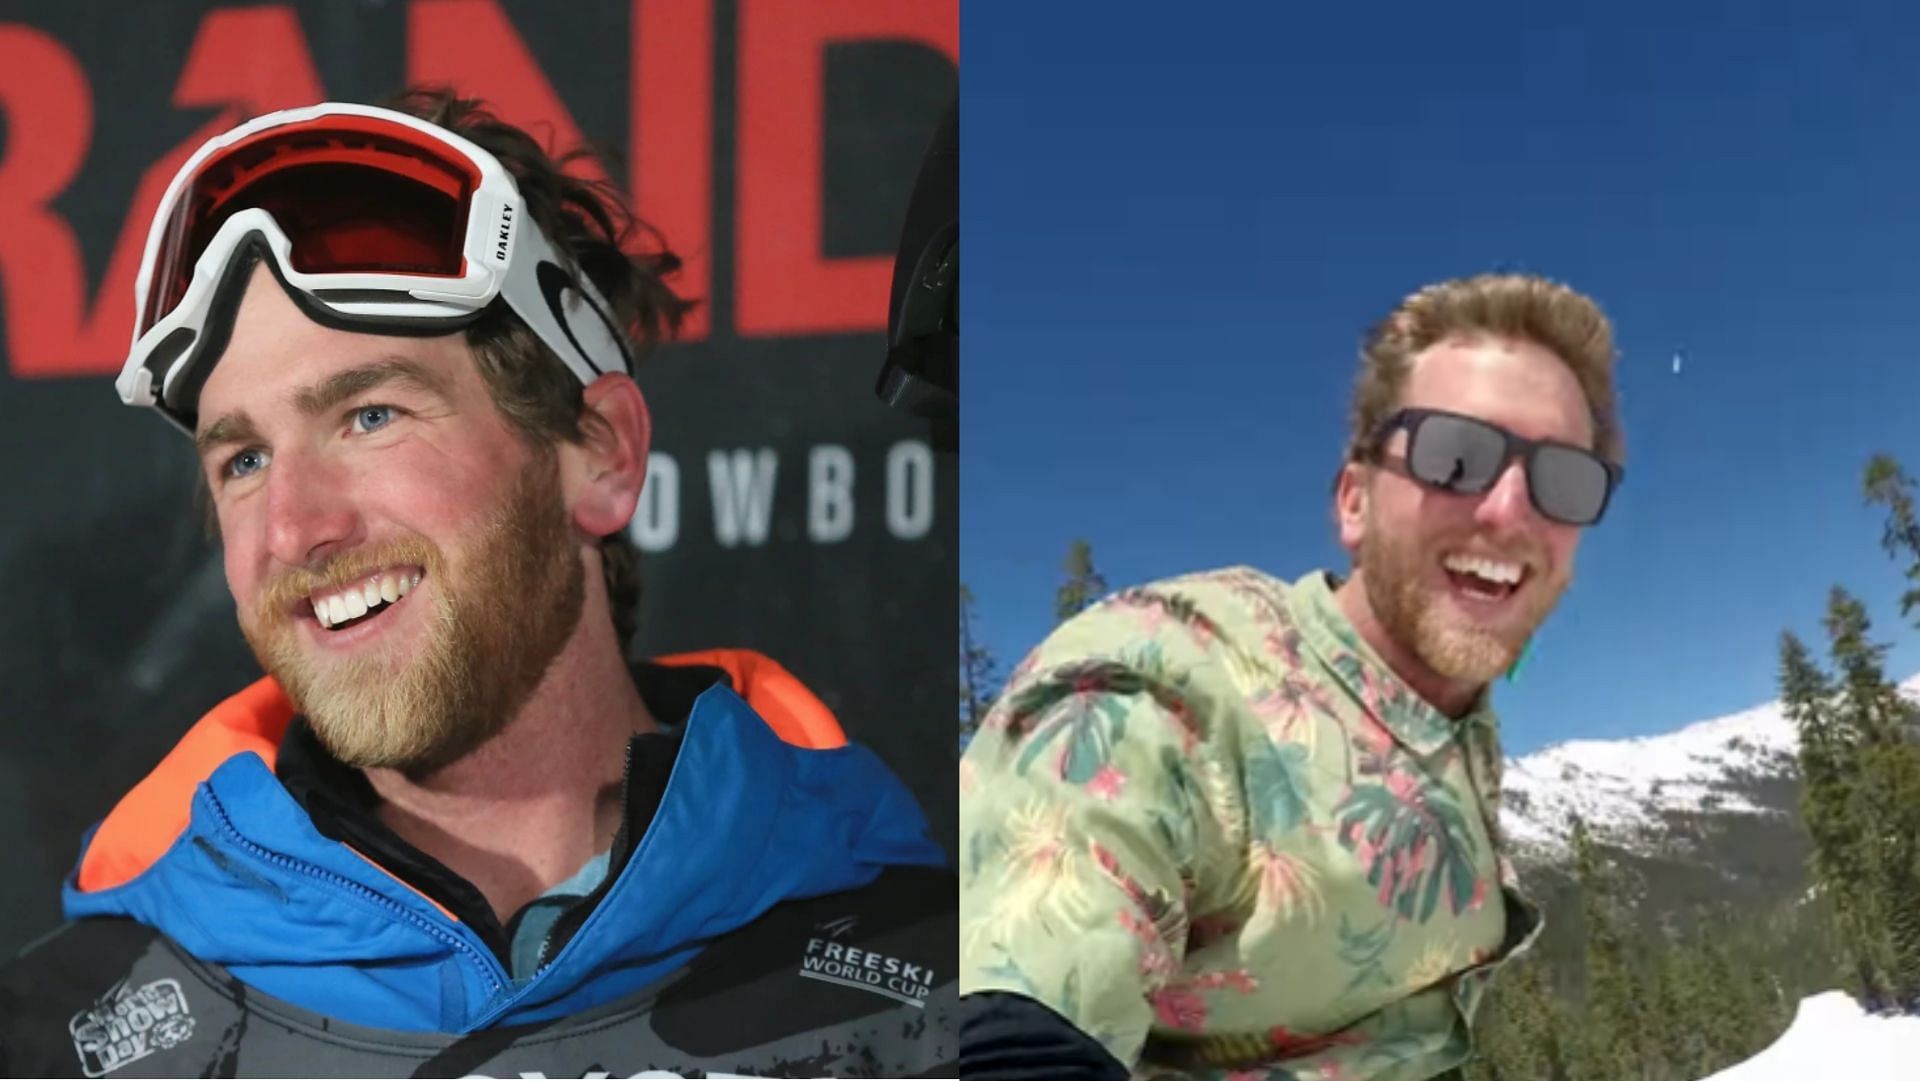 Mountain ski racer Kyle Smaine dies in an avalanche in Japan. (Image via Getty Images, YouTube/@Sierra-at-Tahoe)